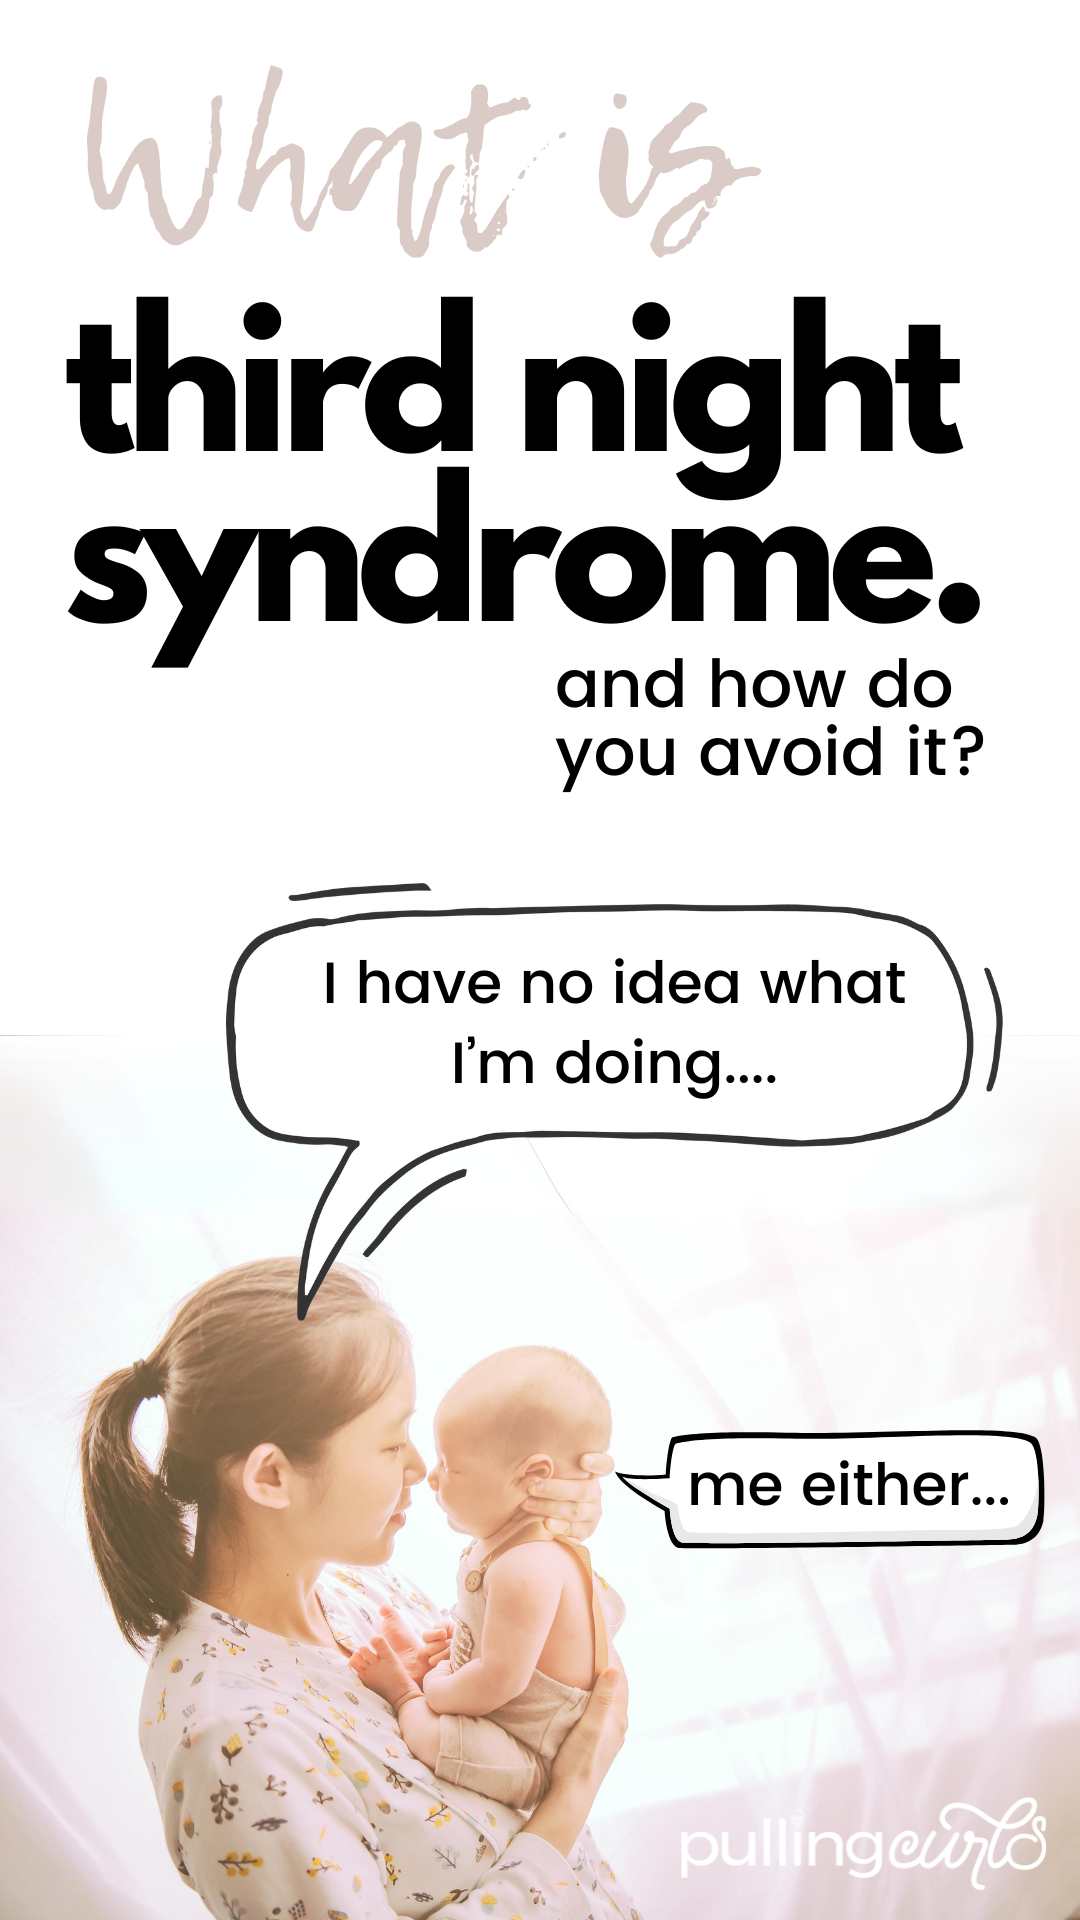 mom and newborn / what is third night syndrome -- and how do you avoid it / i have no idea what I'm doing / baby says "me either" via @pullingcurls